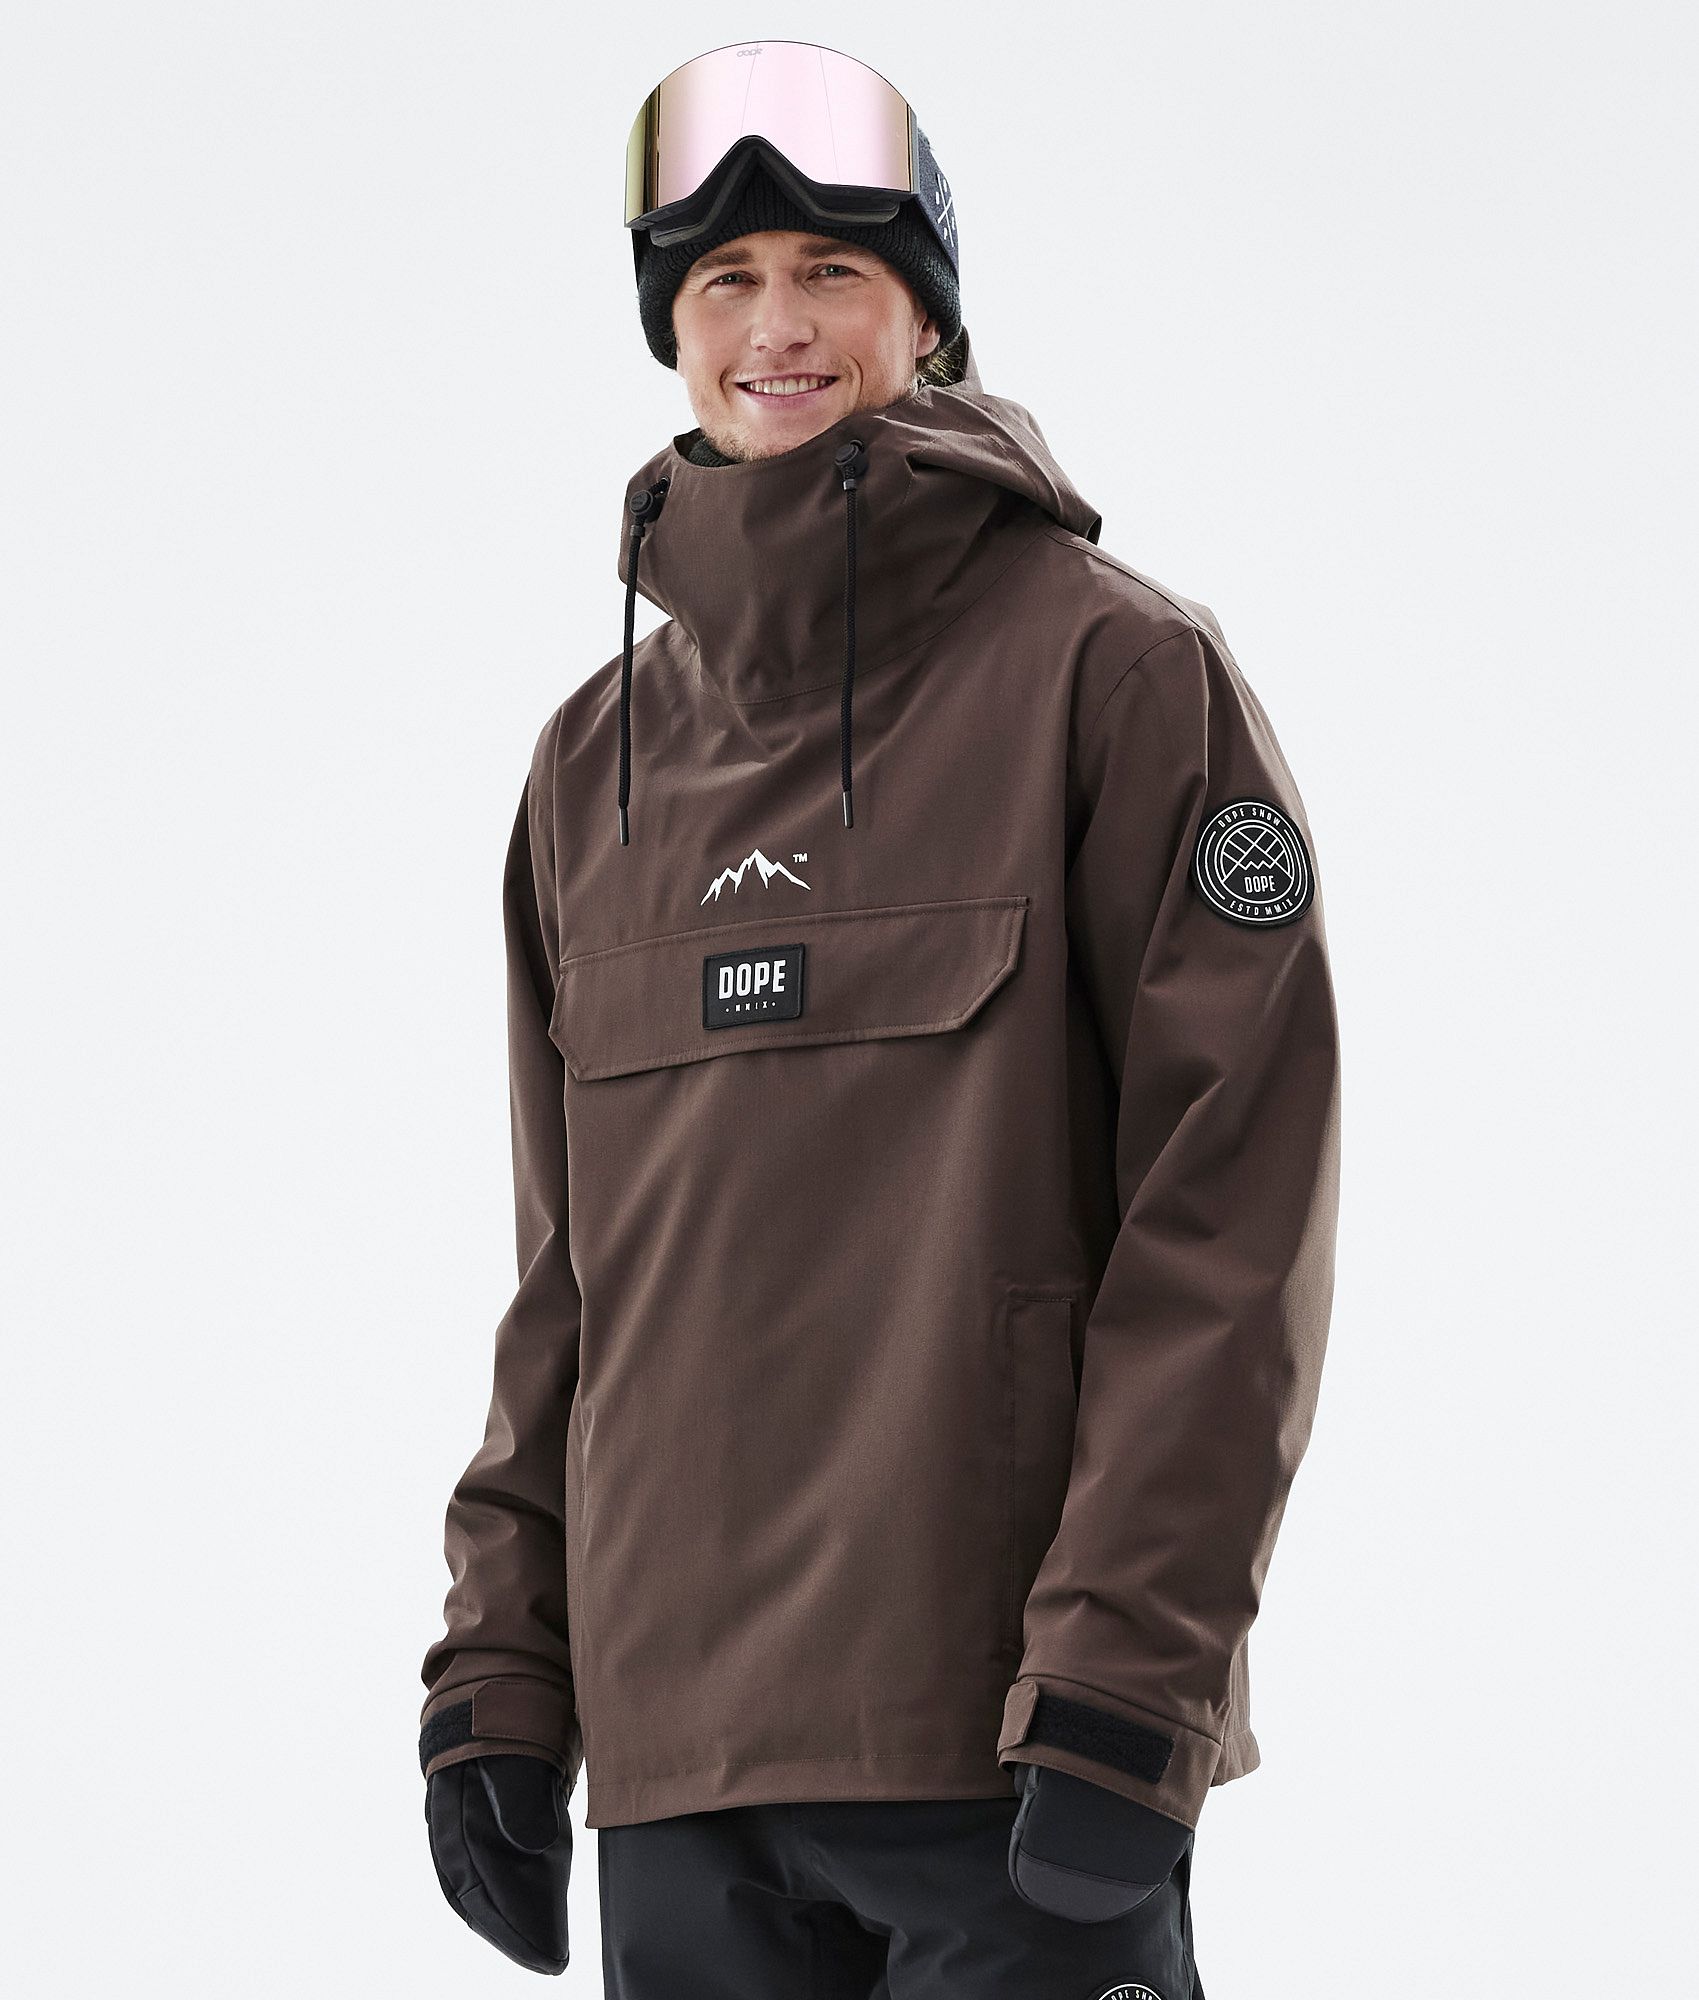 The Best Snowboard Jackets for Men and Women 2023 - Snow Magazine